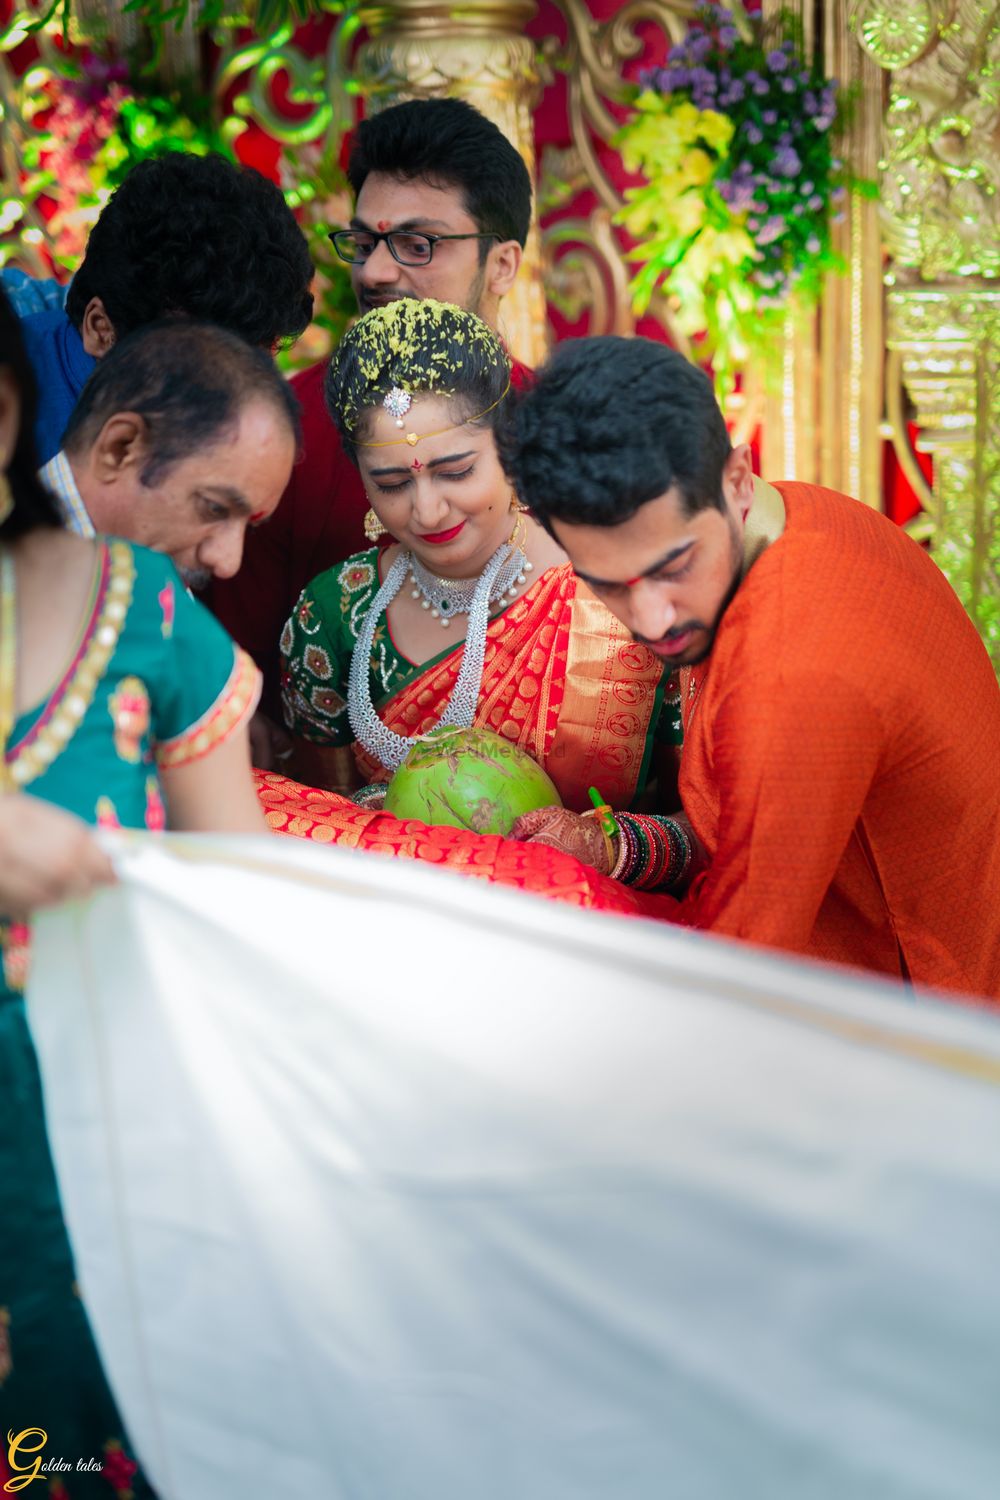 Photo From Pavan & Ratna - By Golden Tales